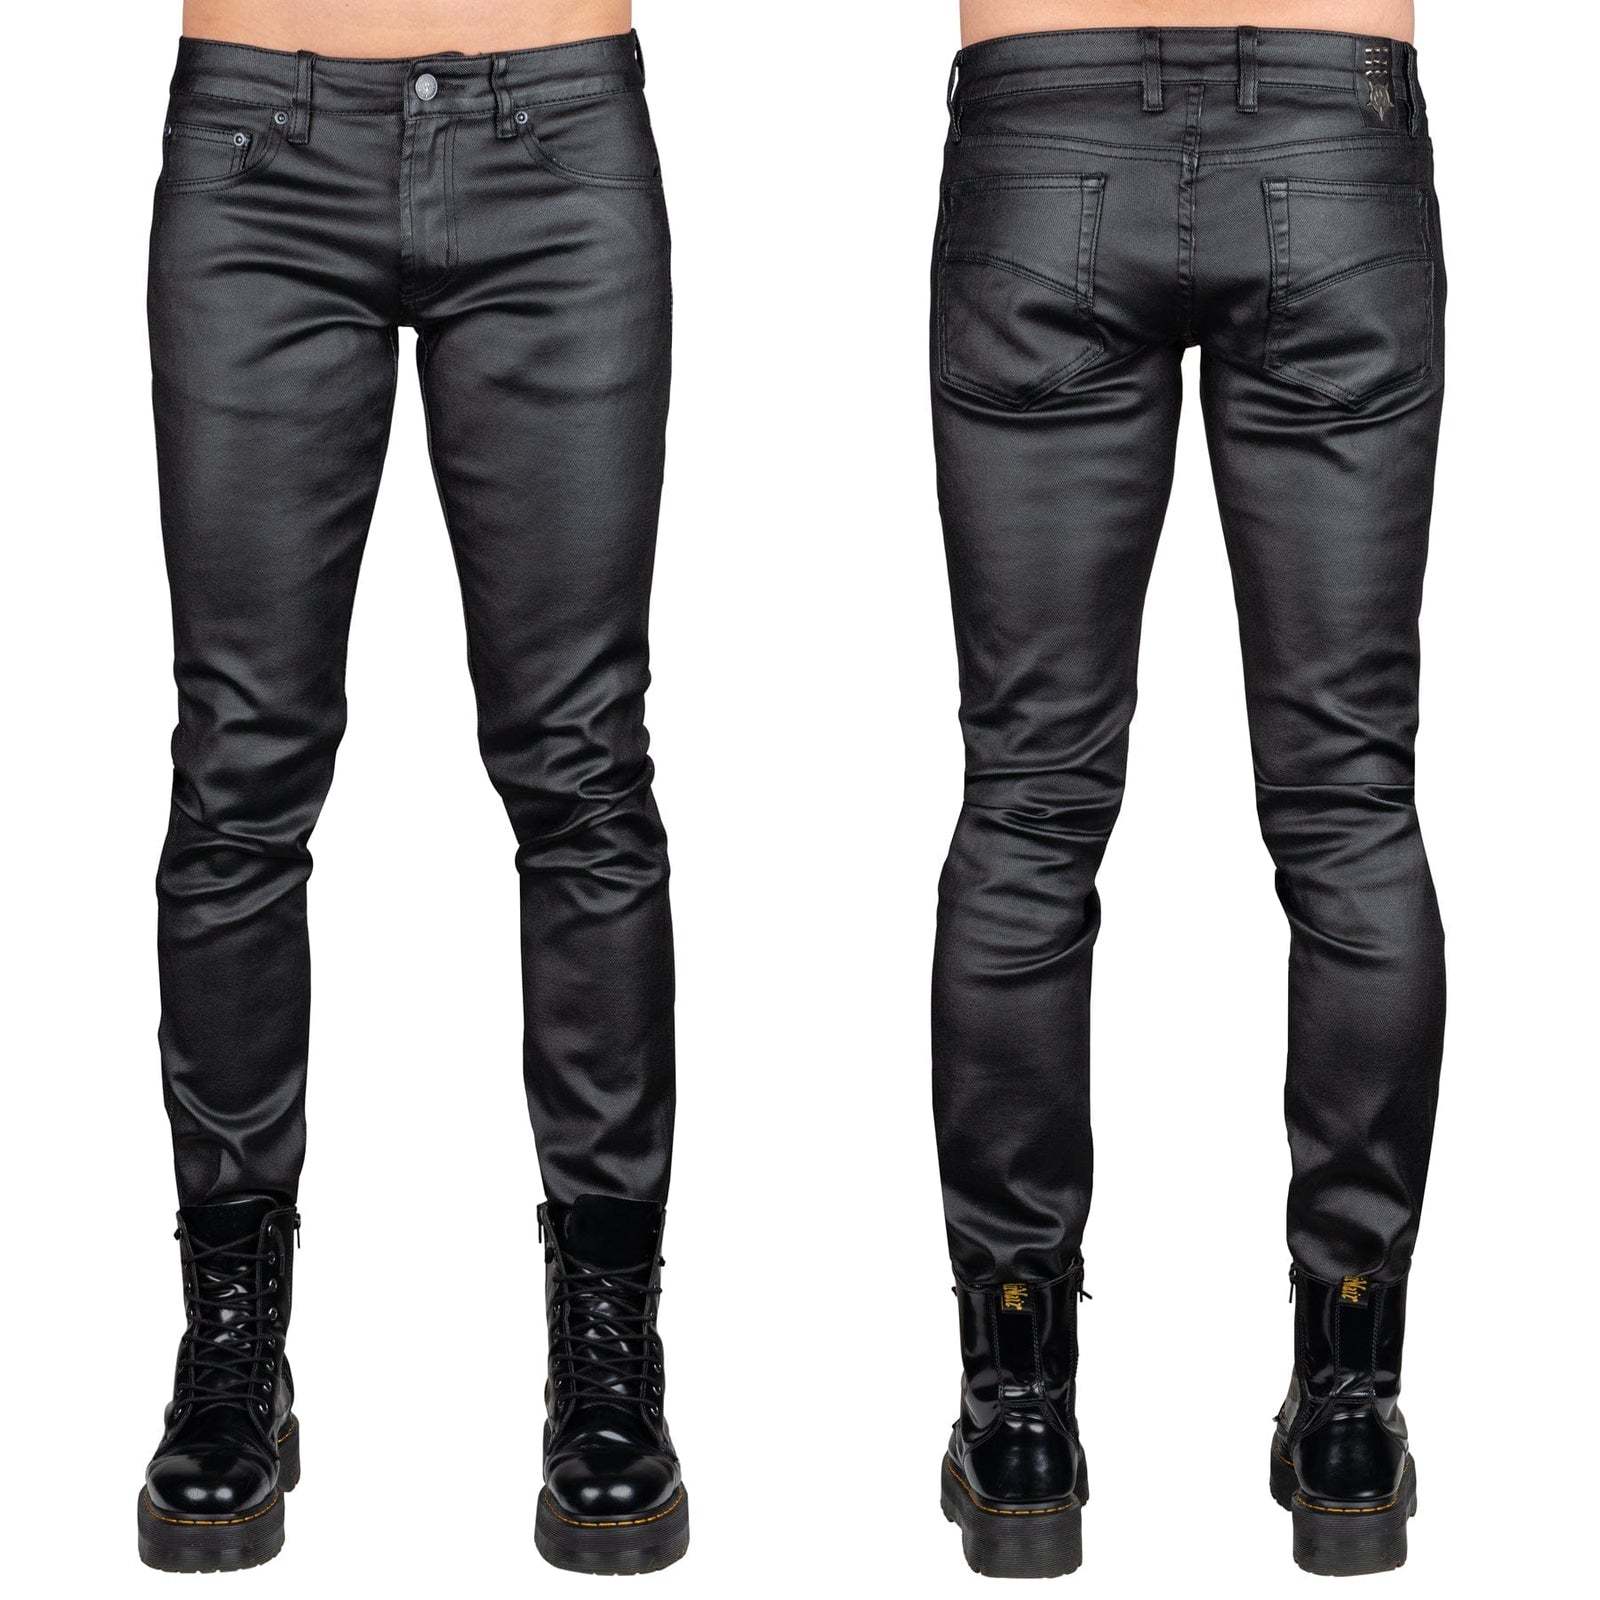 All Access Collection Pants Rampager Waxed Denim Jeans